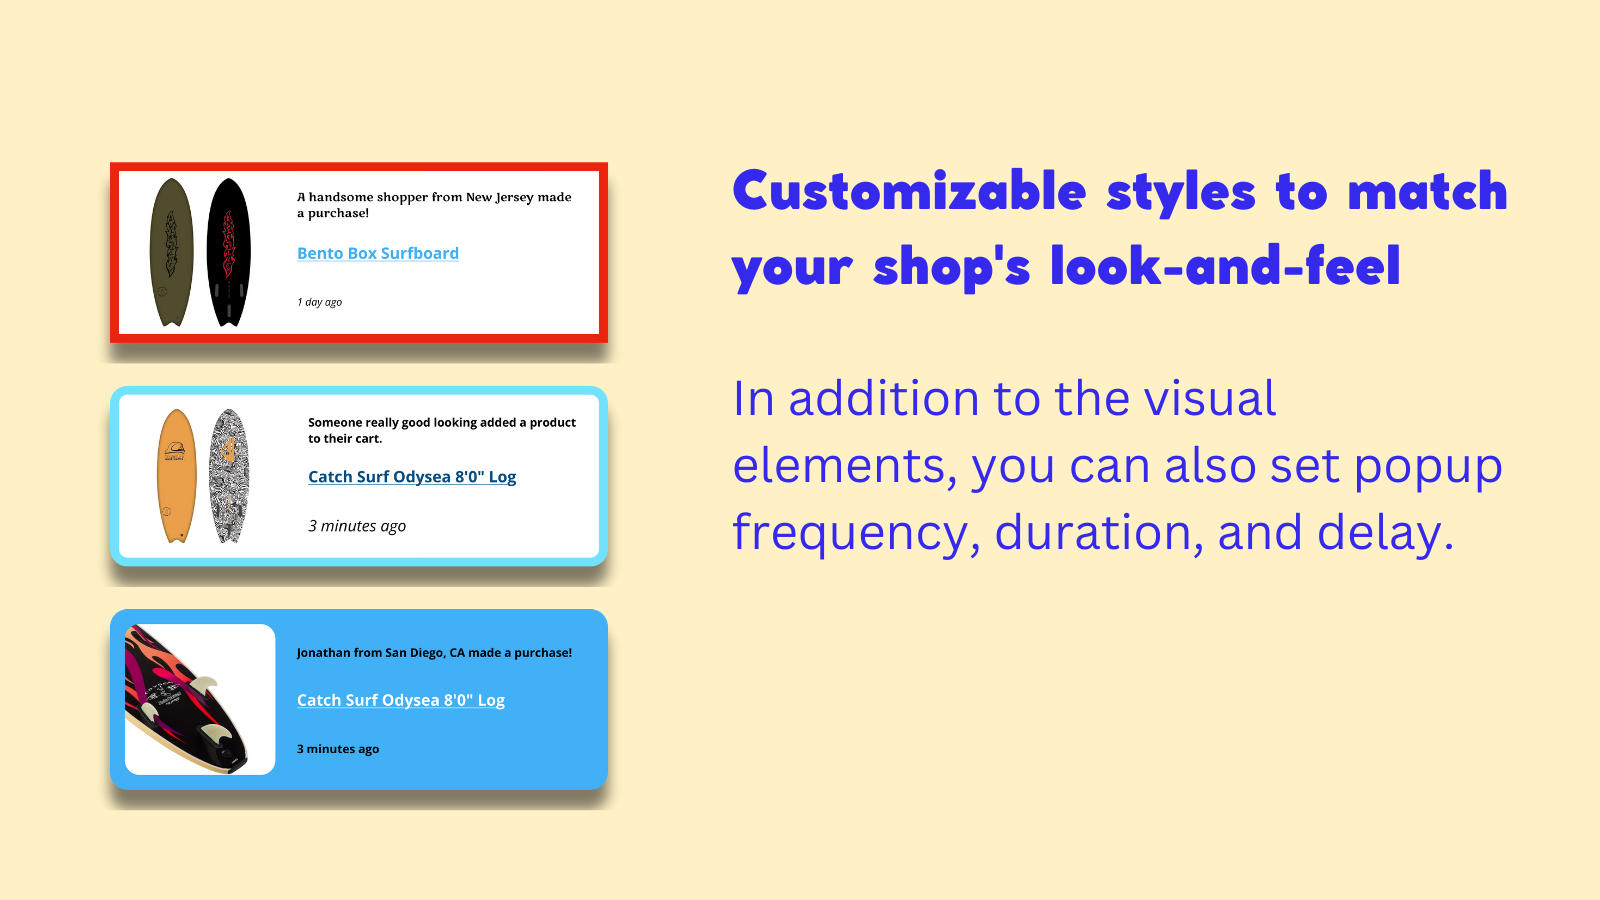 Customizable styles to match your shop's look-and-feel